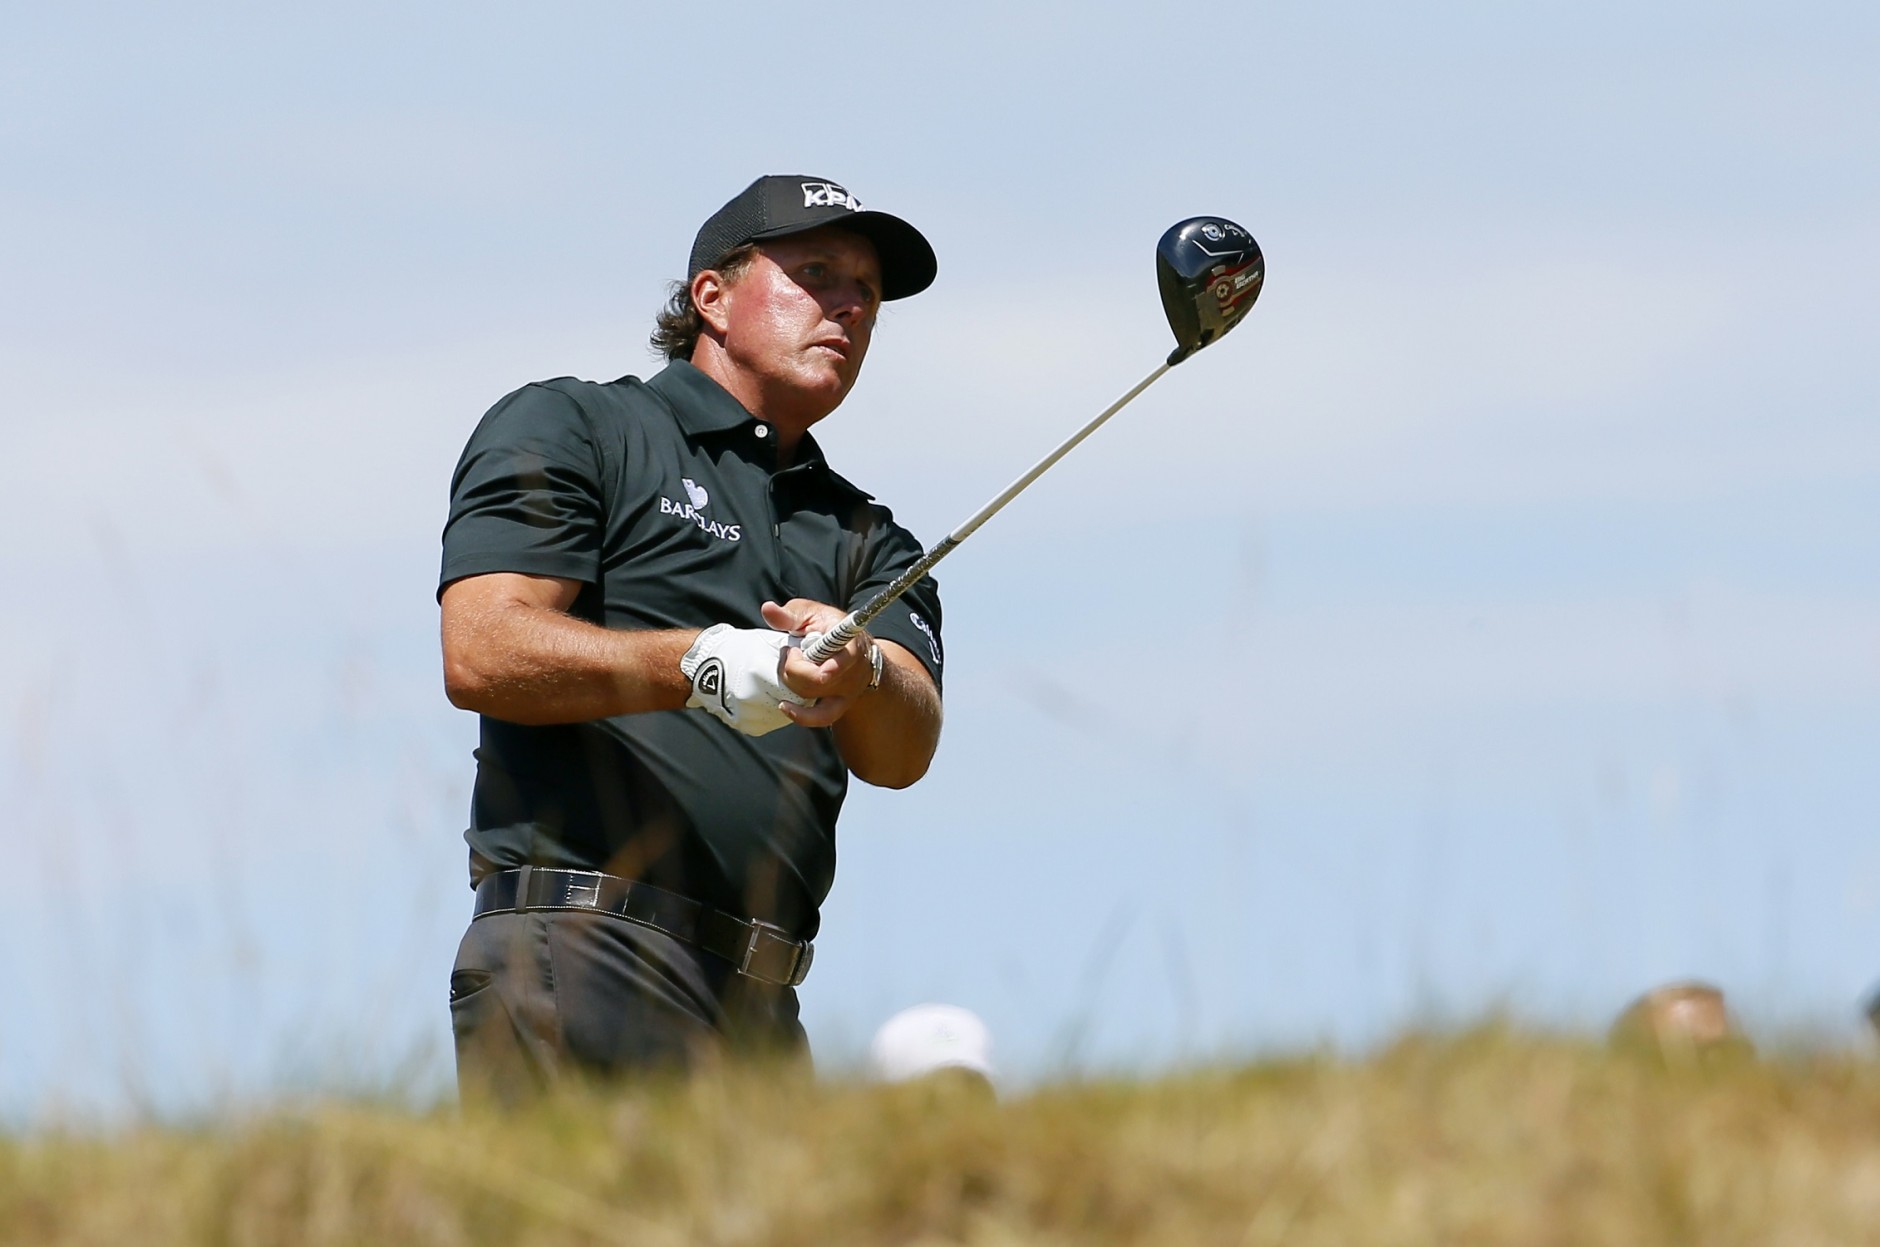 Phil Mickelson watches his tee shot on the 18th hole during the final round of the U.S. Open golf tournament at Chambers Bay on Sunday, June 21, 2015 in University Place, Wash. (AP Photo/Matt York)